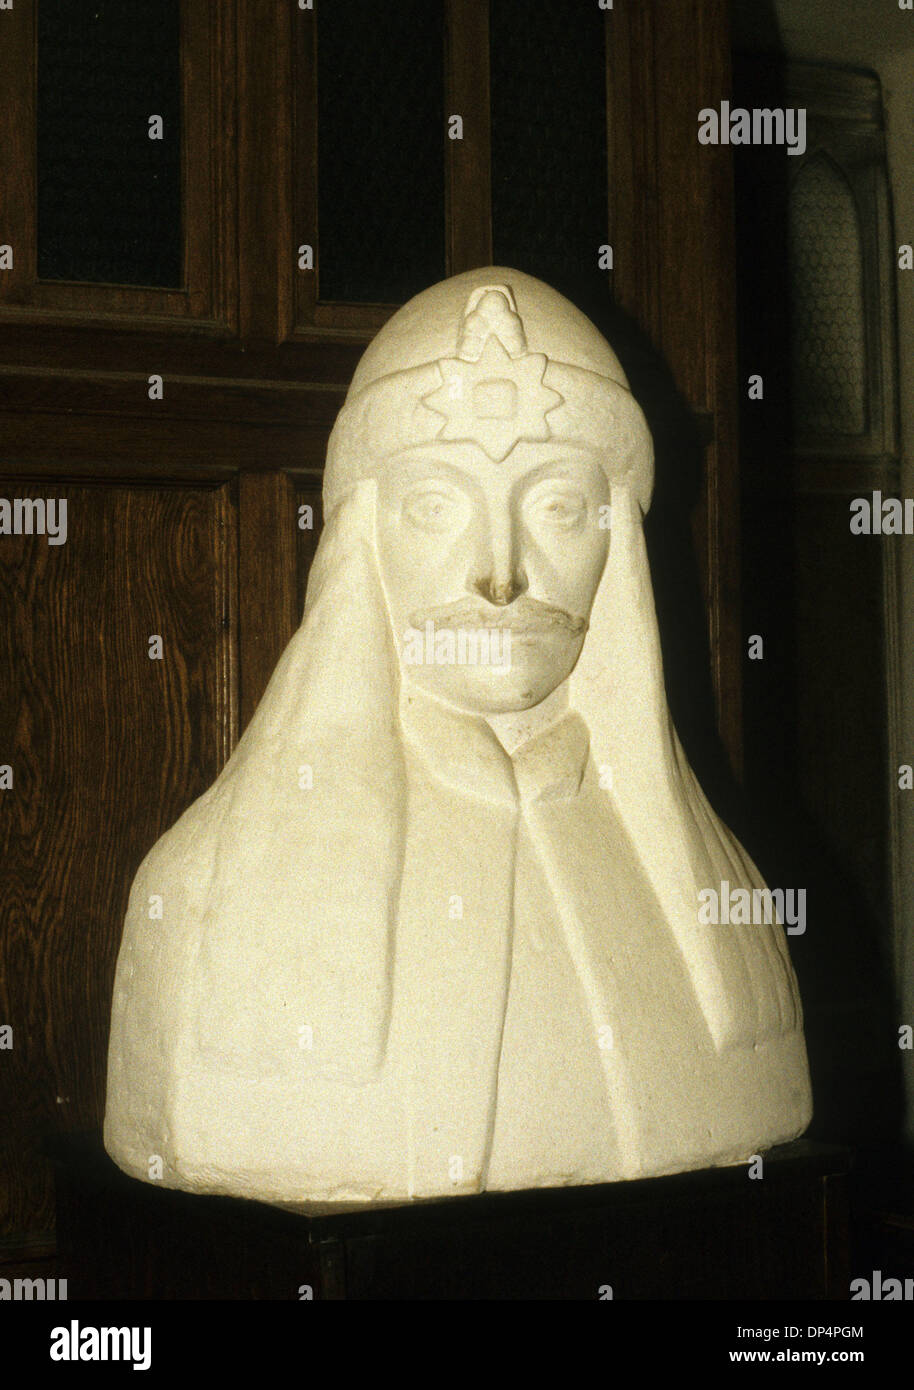 Aug 21, 2006; Sighisoara, ROMANIA; A bust in the building where Romanian prince Vlad Dracul was born. Mandatory Credit: Photo by Richard Clement/ZUMA Press. (©) Copyright 2006 by Richard Clement Stock Photo